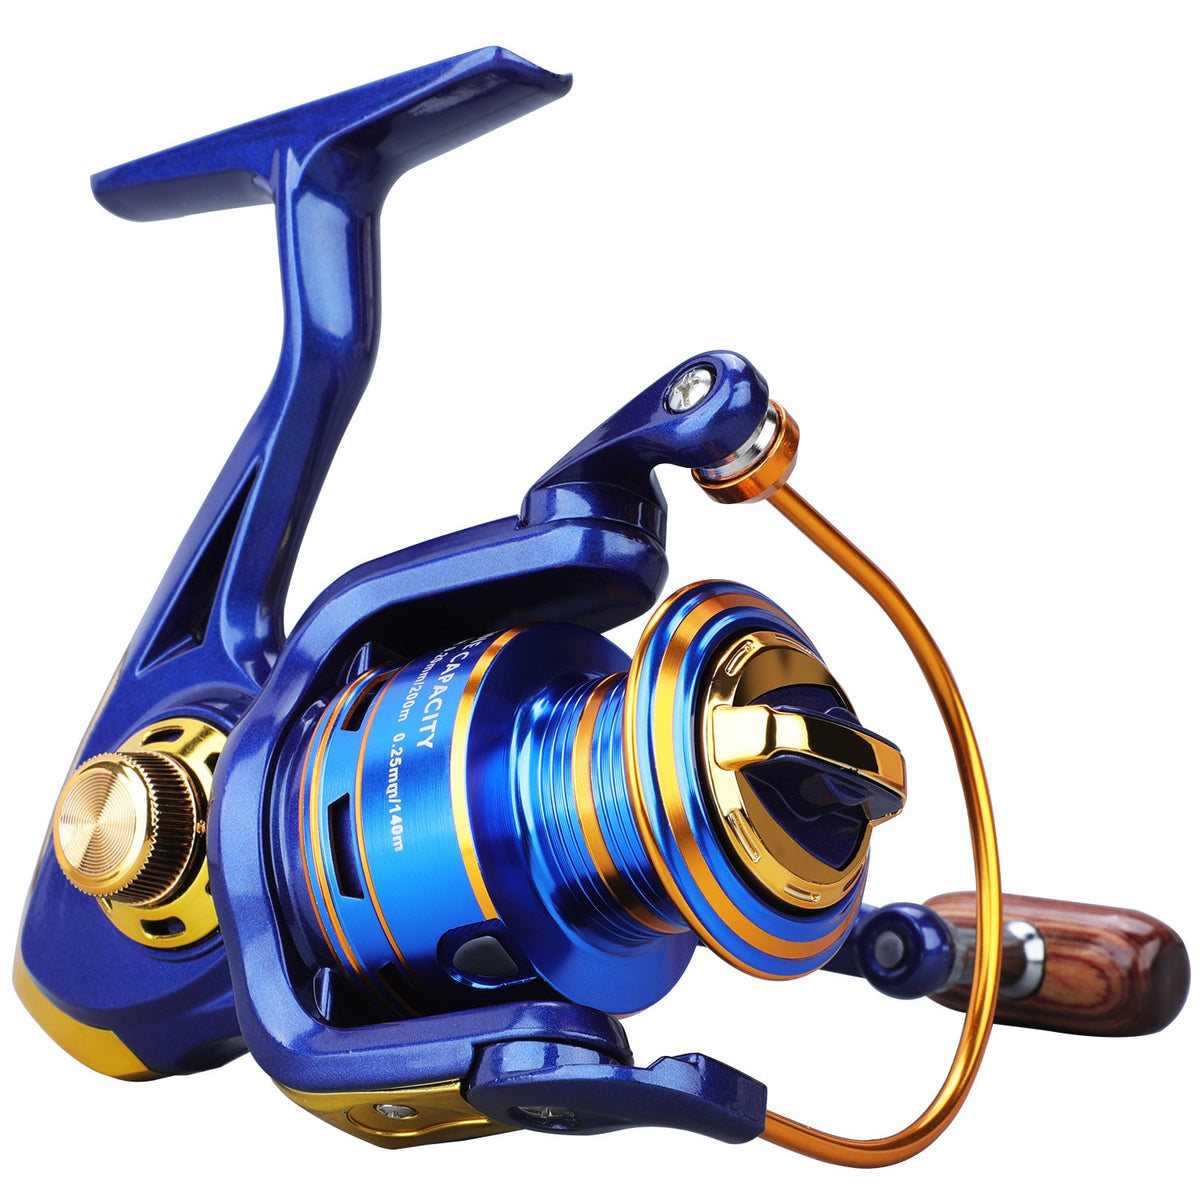  YCDJCS Spinning Reel Full Metal Body 4000/5000 Series Fishing  Reels 6.2:1 High Speed Ratio 11+1 Durable Stainless Steel Bearings  Saltwater & Freshwater Reels (Color : Green, Size : 4000) : Sports &  Outdoors